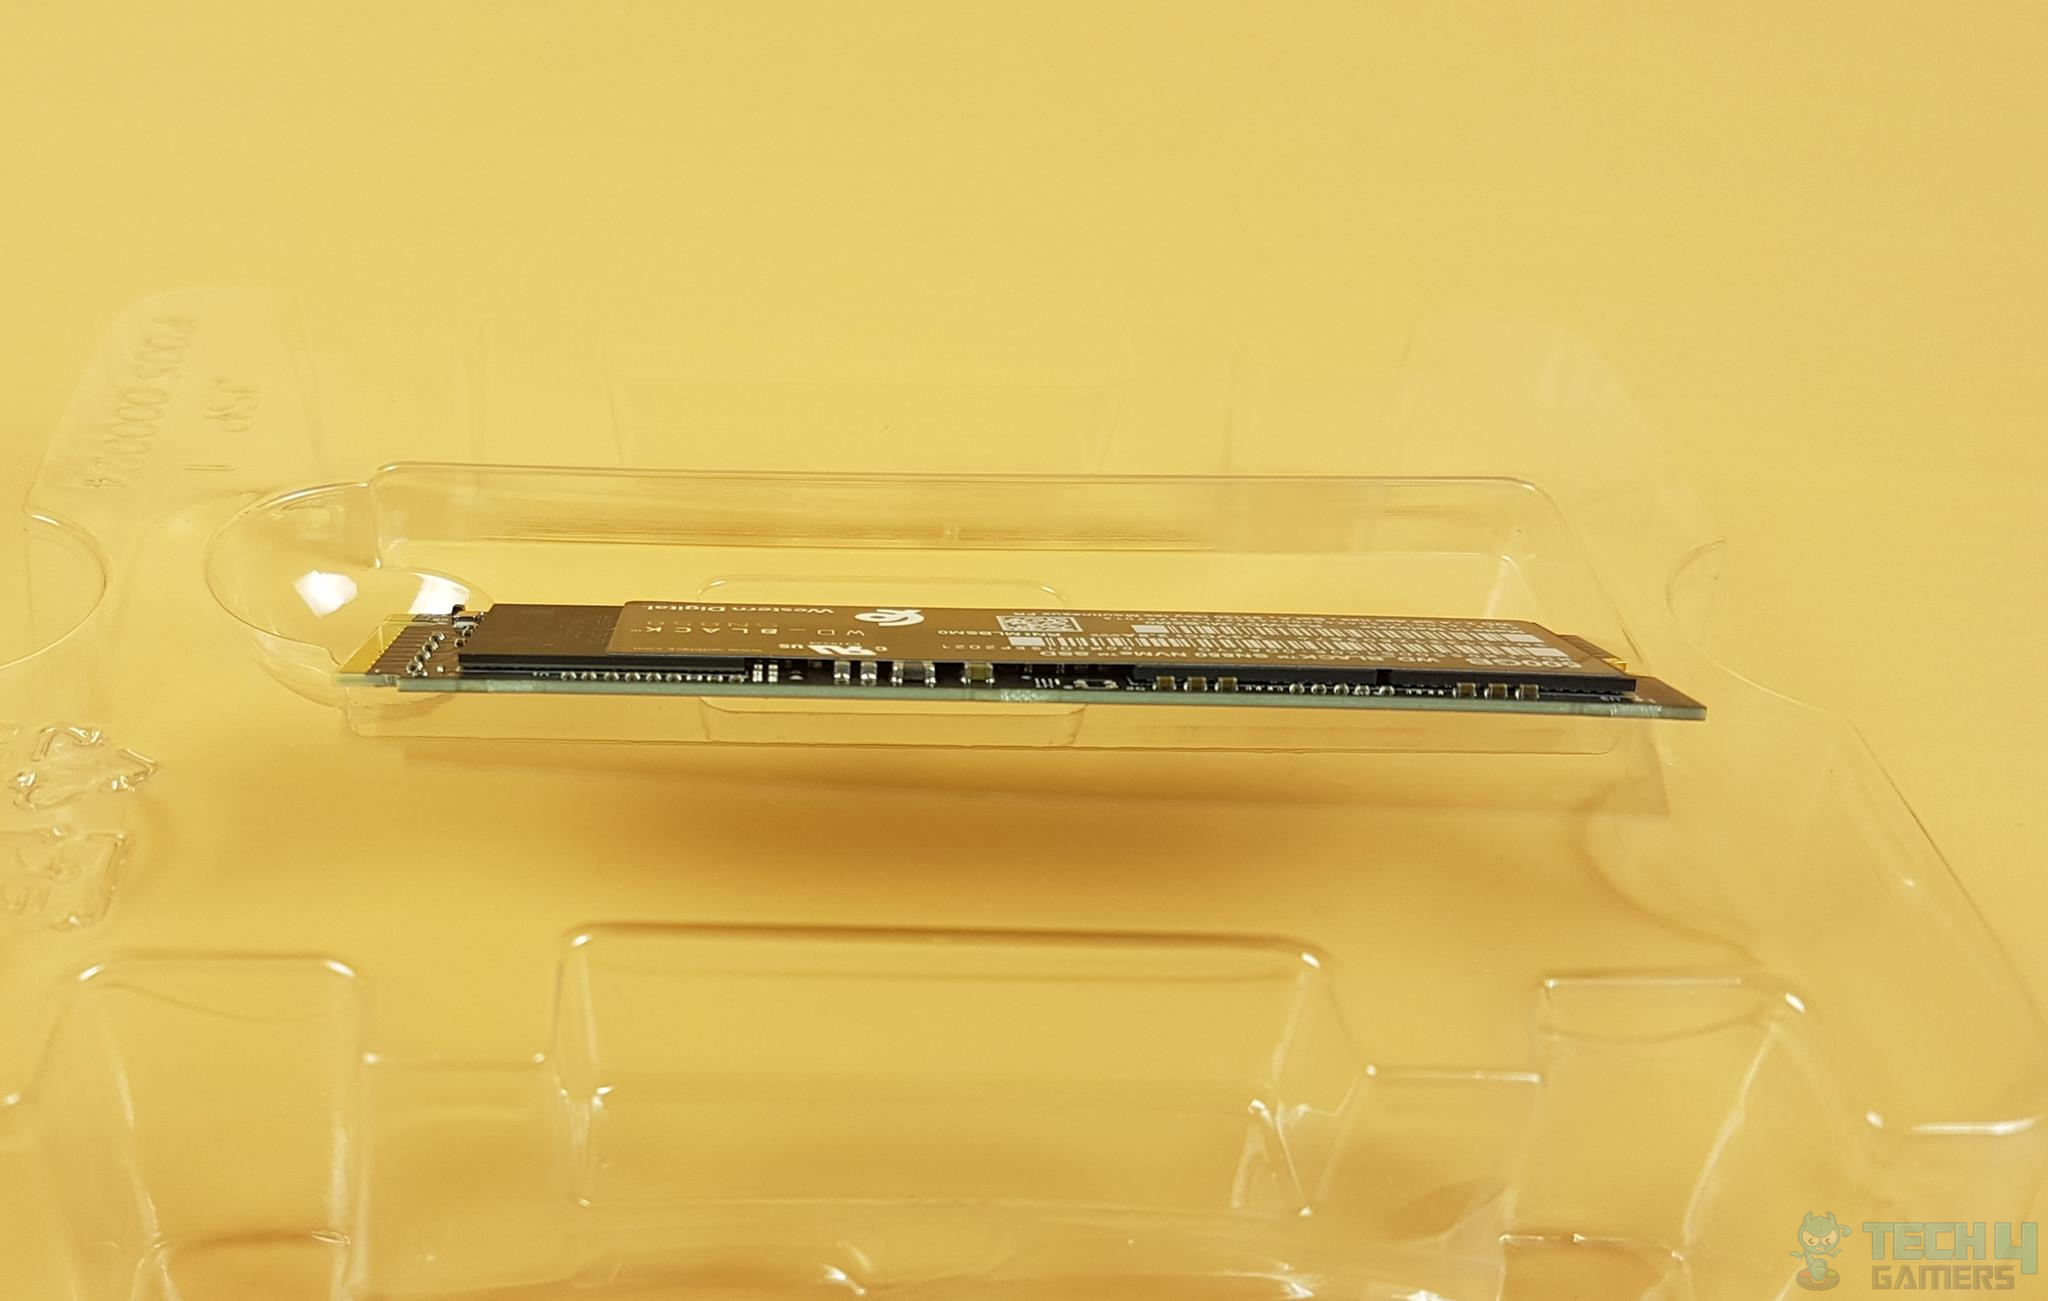 WD Black SN850 500GB NVMe — Side view of the SSD